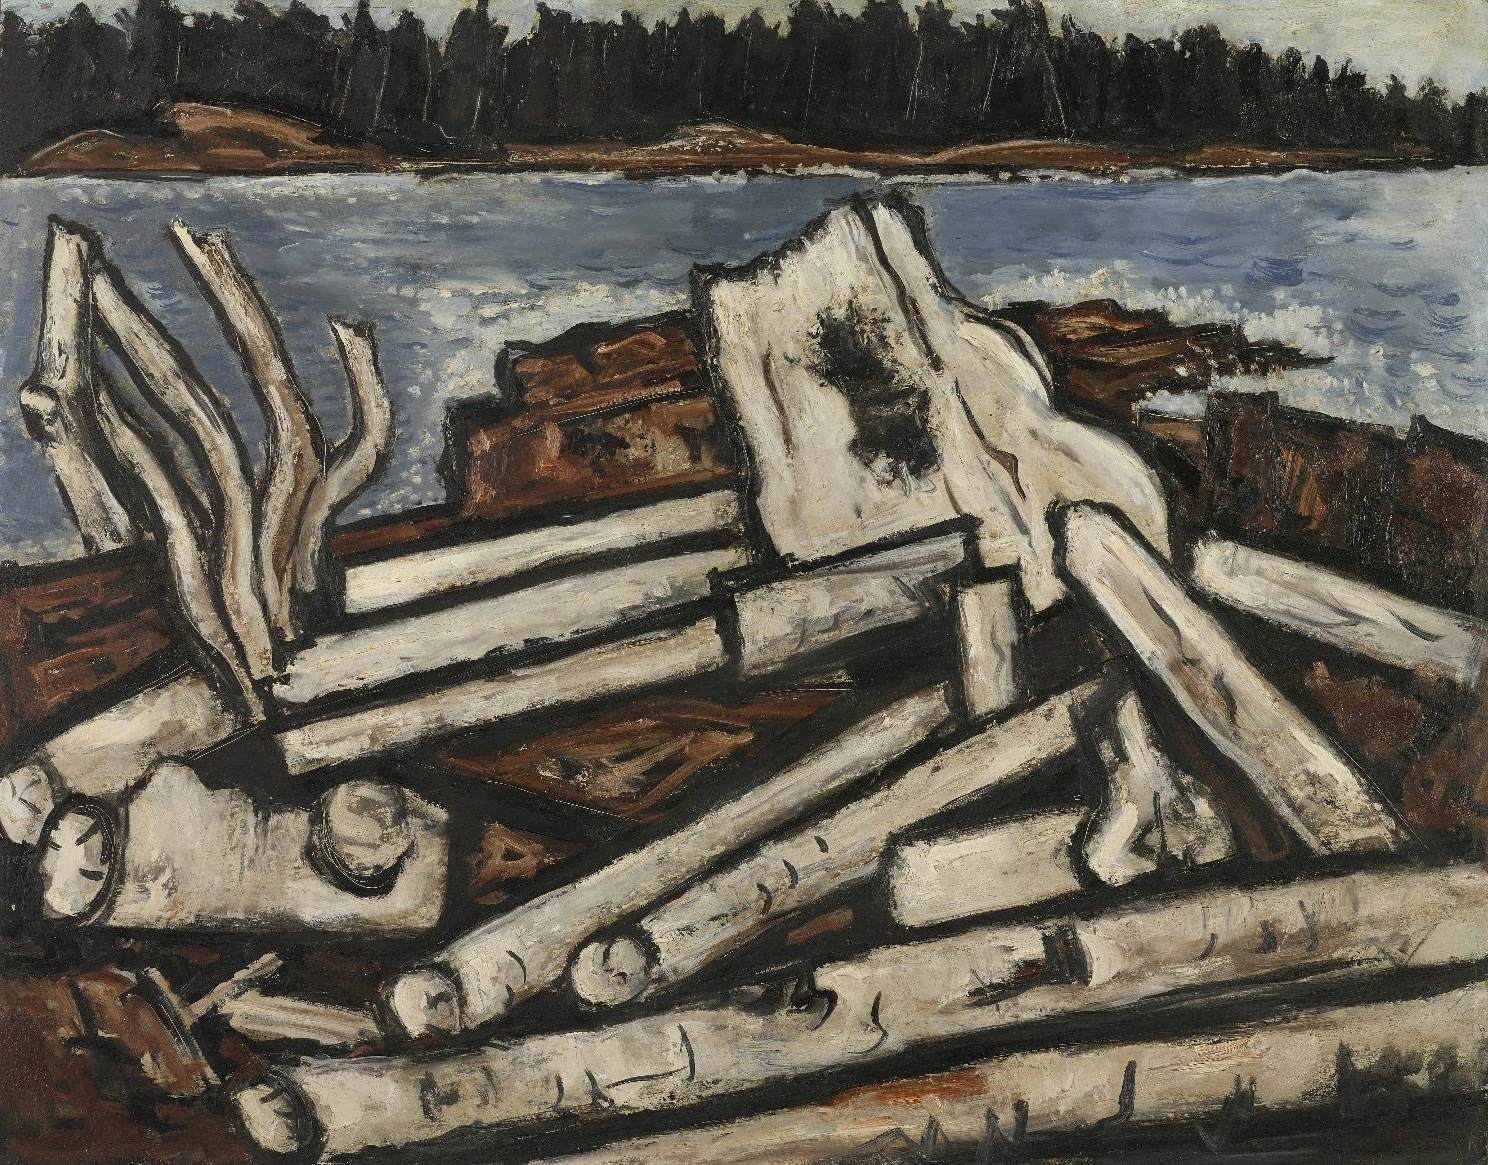 Ghosts of the Forest, Marsden Hartley